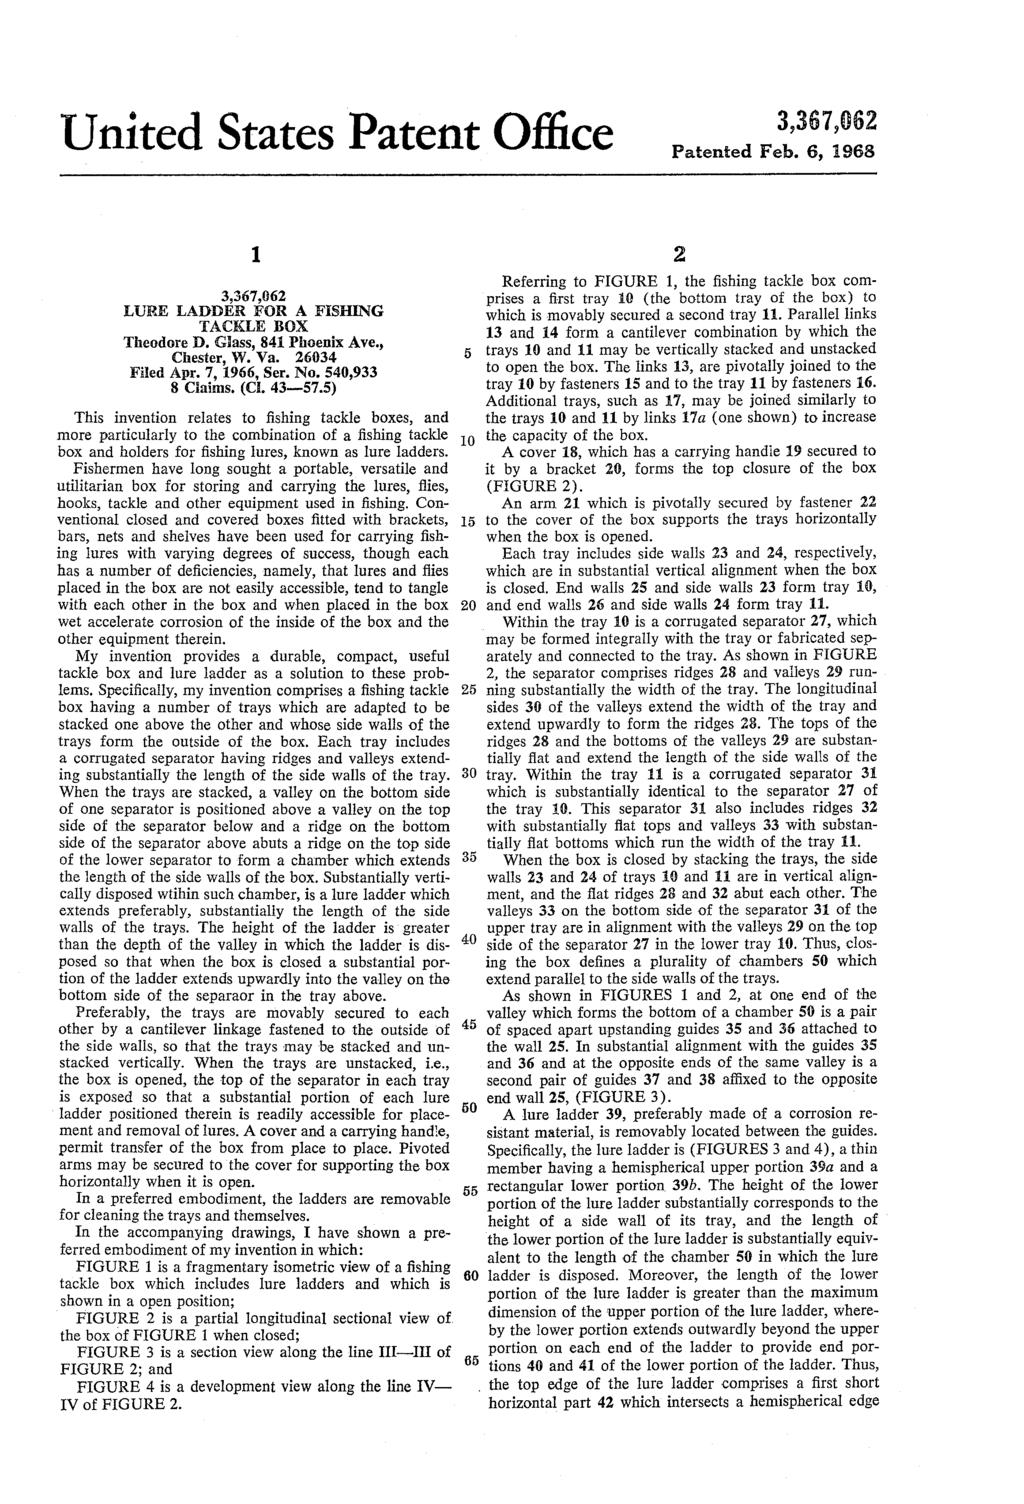 United States Patent Office Patented Feb. 6, 1968 1. URE LADDER FOR A FSHENG TACLE BOX Theodore D. Gass, 841. Phoenix Ave., Chester, W. Va. 26.034 Filed Apr. 7, 1966, Ser. No. 540,933 8 Ciaims. (C.